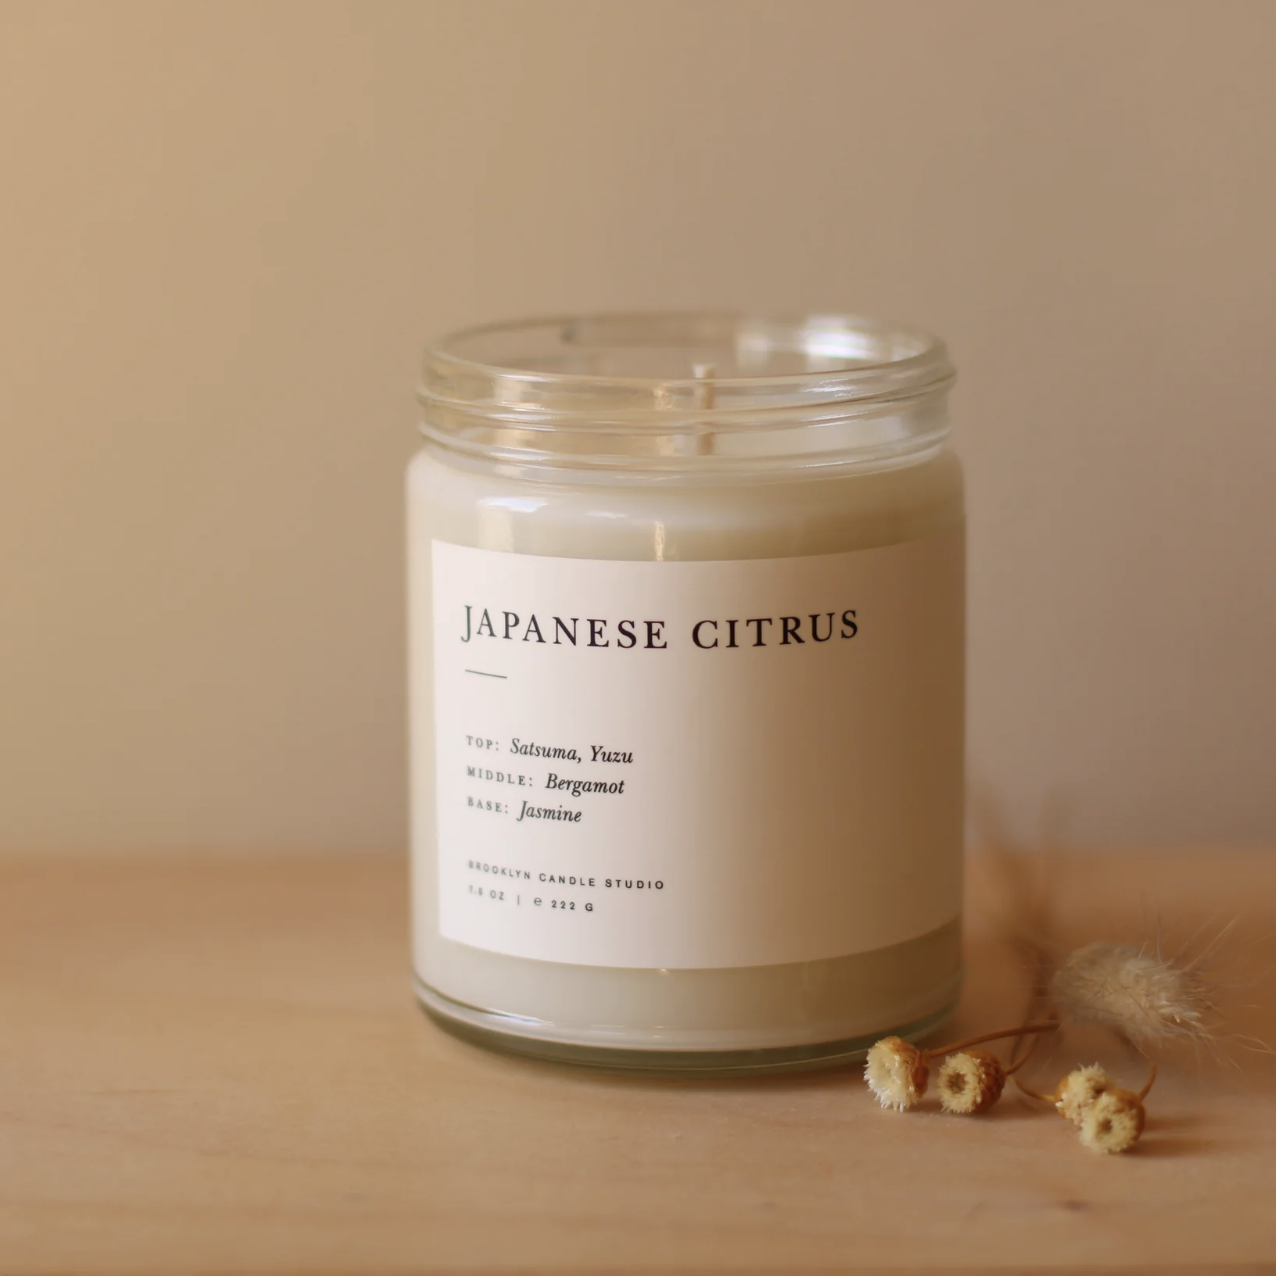 Small Batch Candle $28